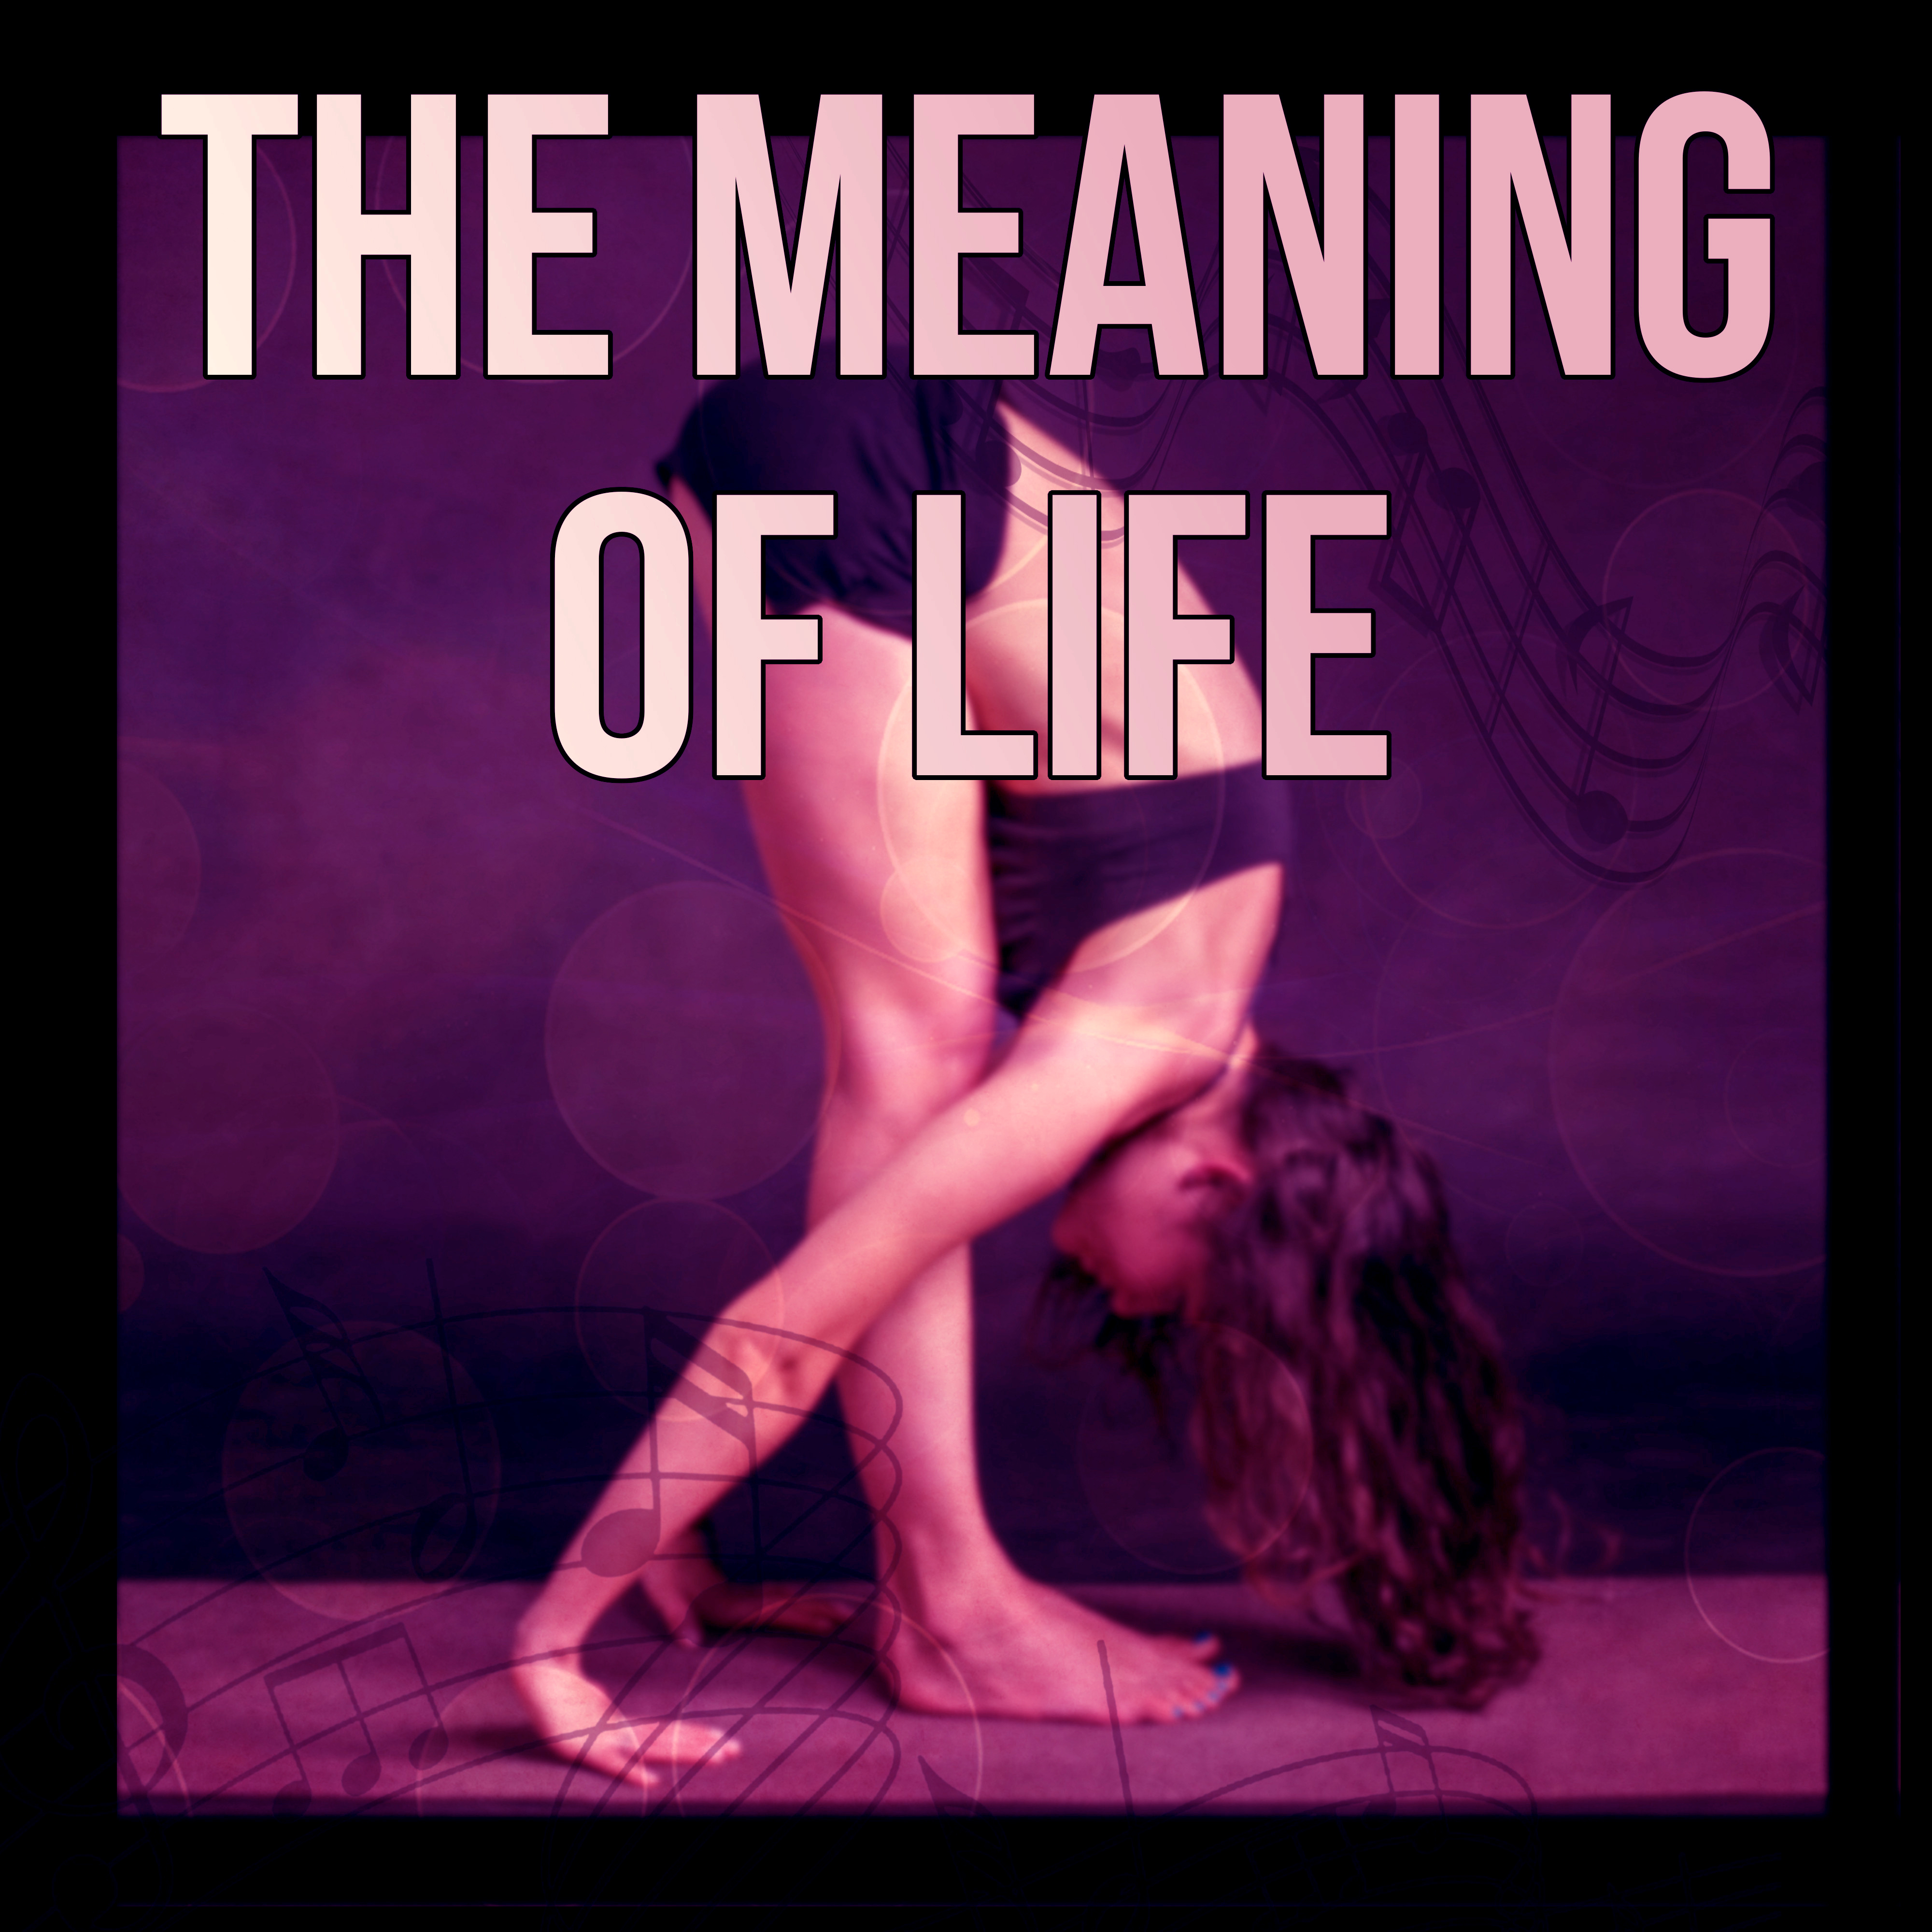 The Meaning of Life – Ocean Sounds for Yoga Class & Mindfulness Meditation, Basic Transcendental Meditation for Beginners with Nature Sounds,